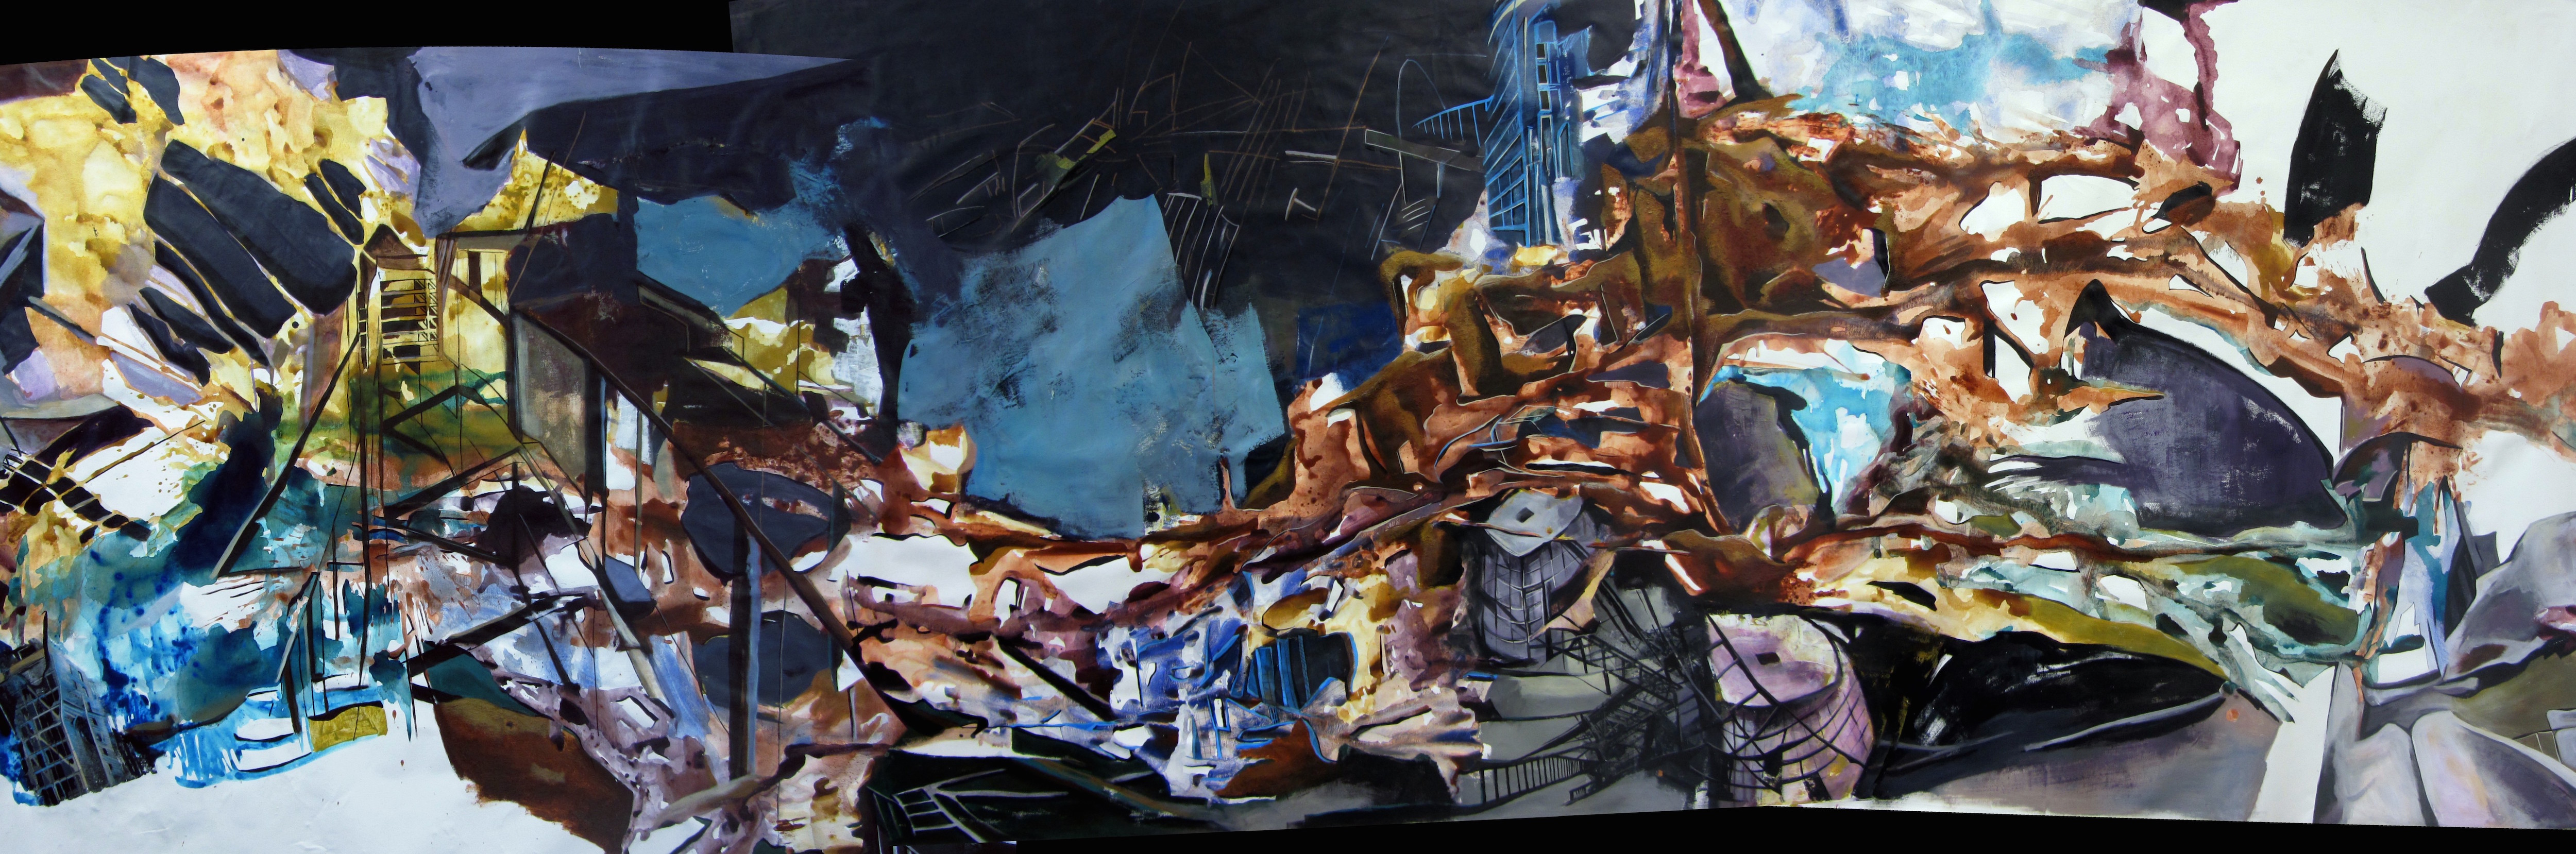 Panorama #26, acrylic on canvas, 56x172 inches, 2013